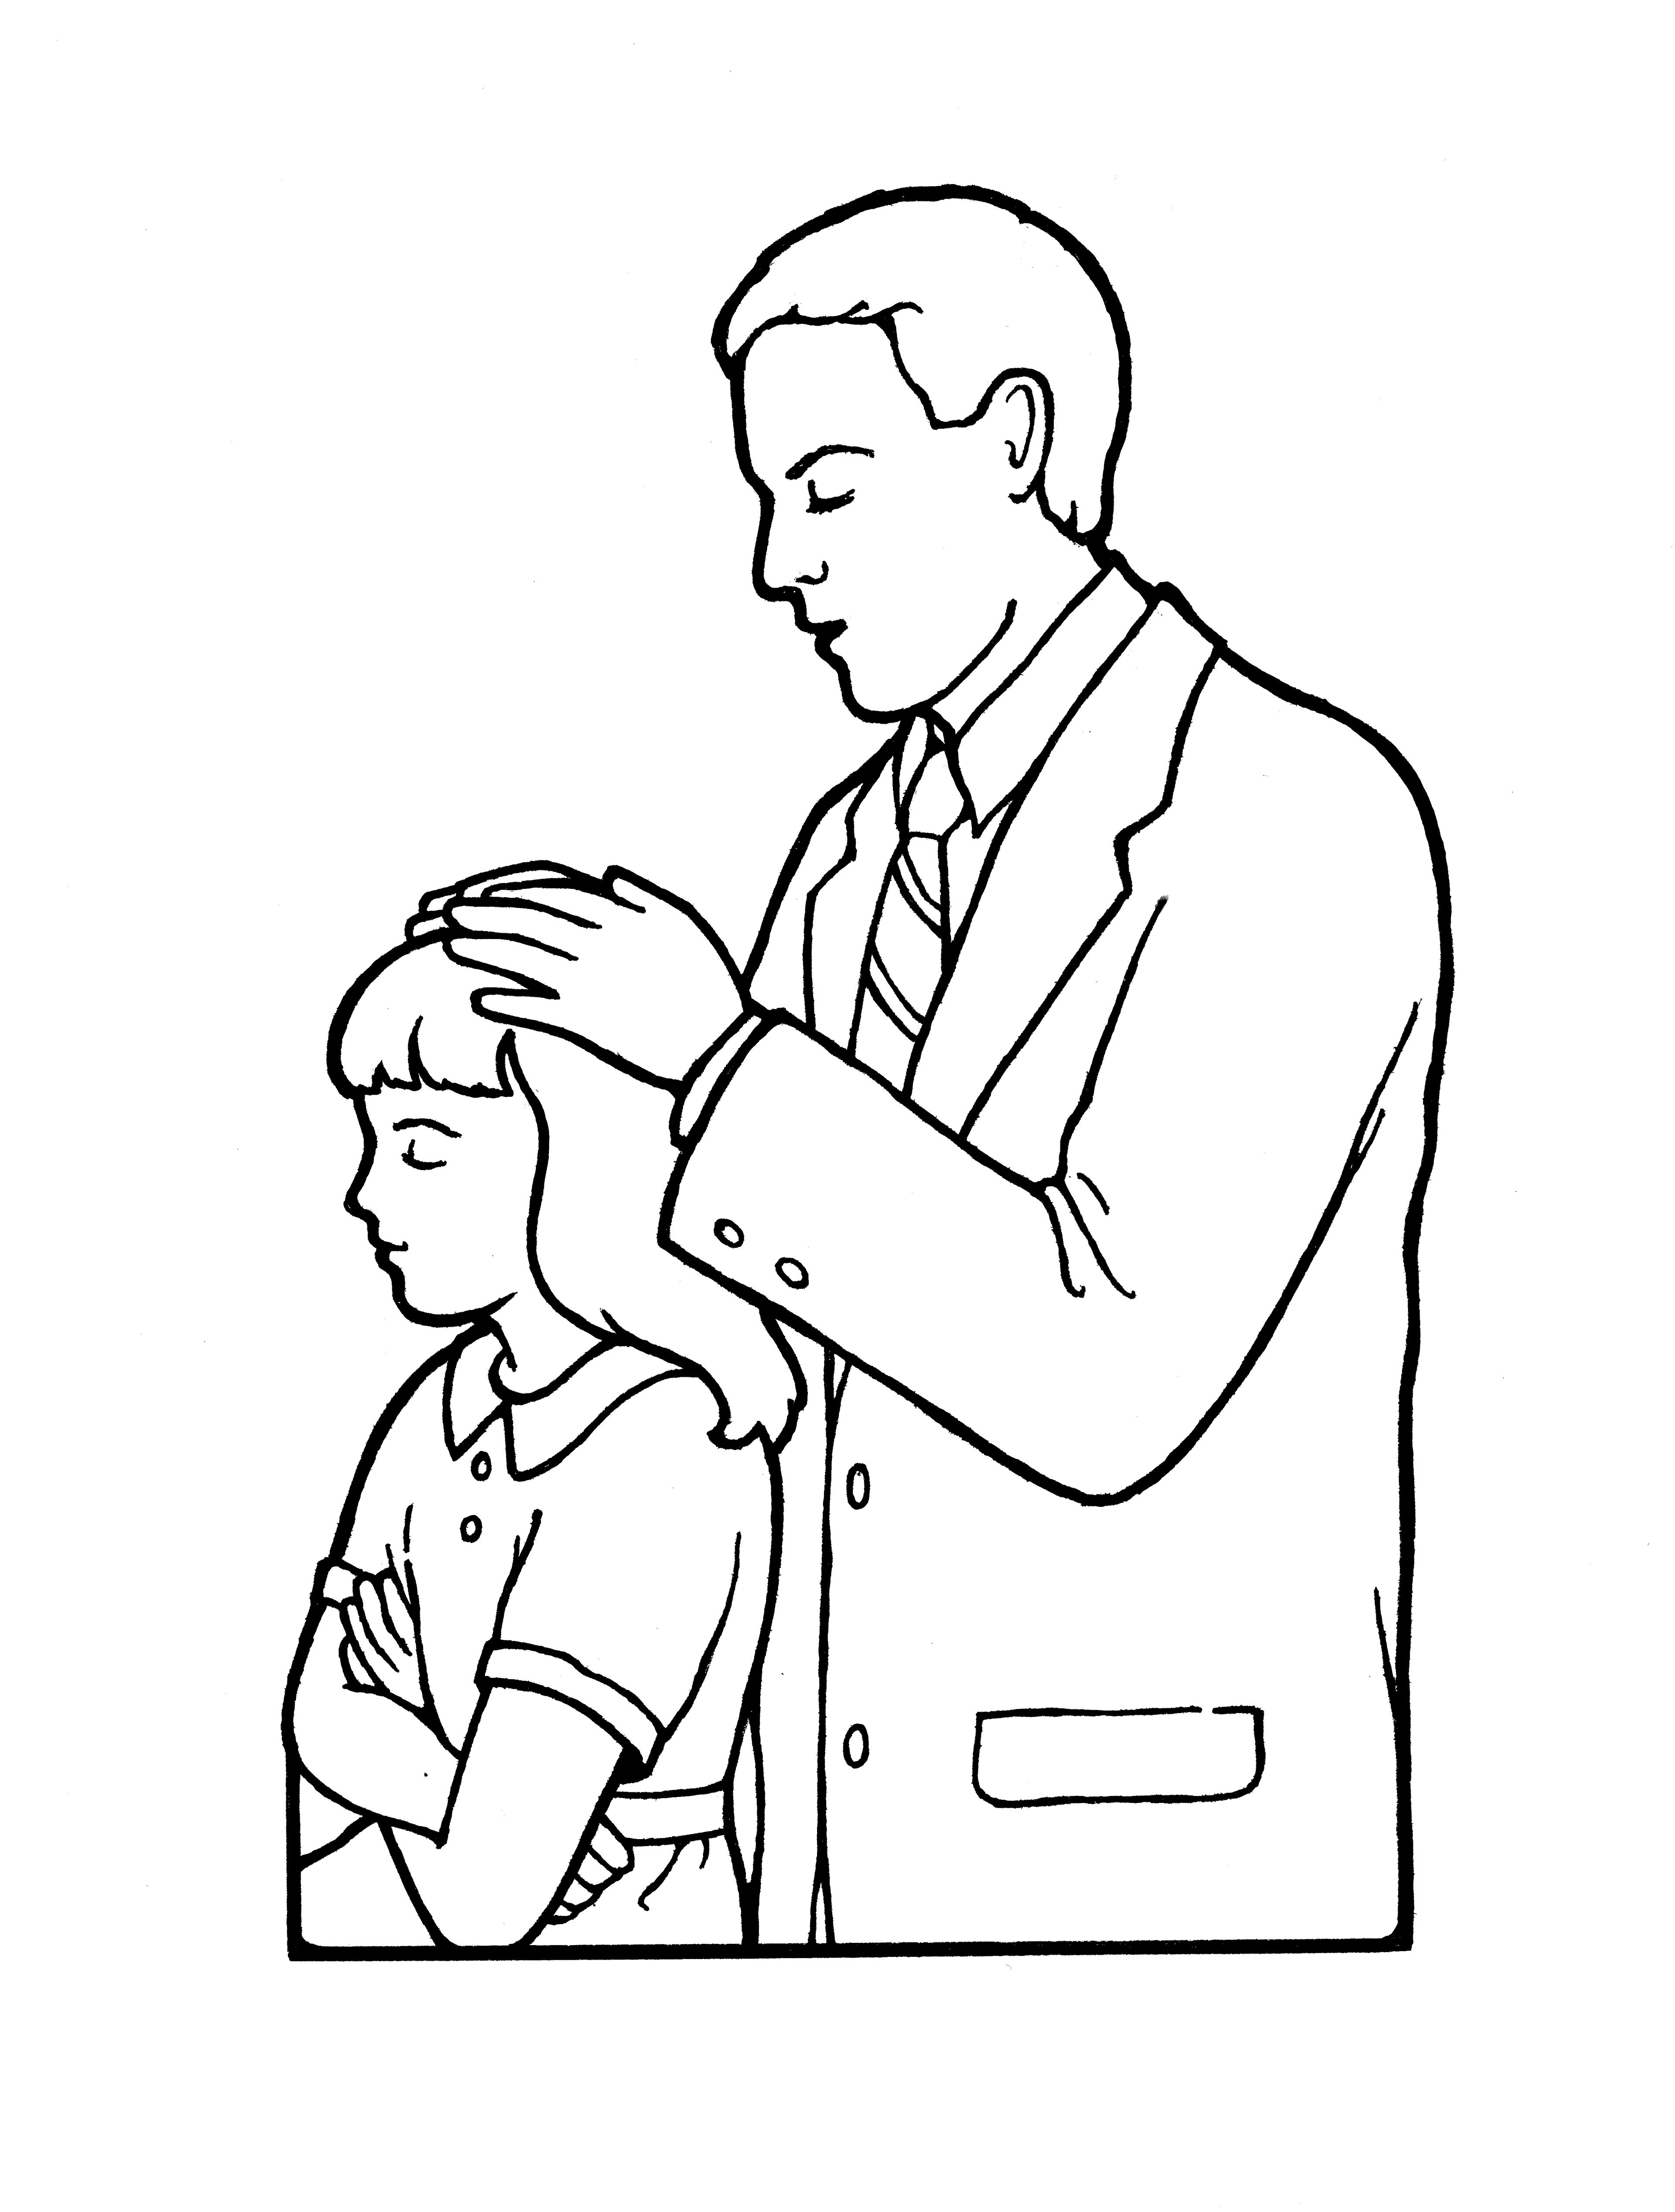 An illustration of a young girl being confirmed.